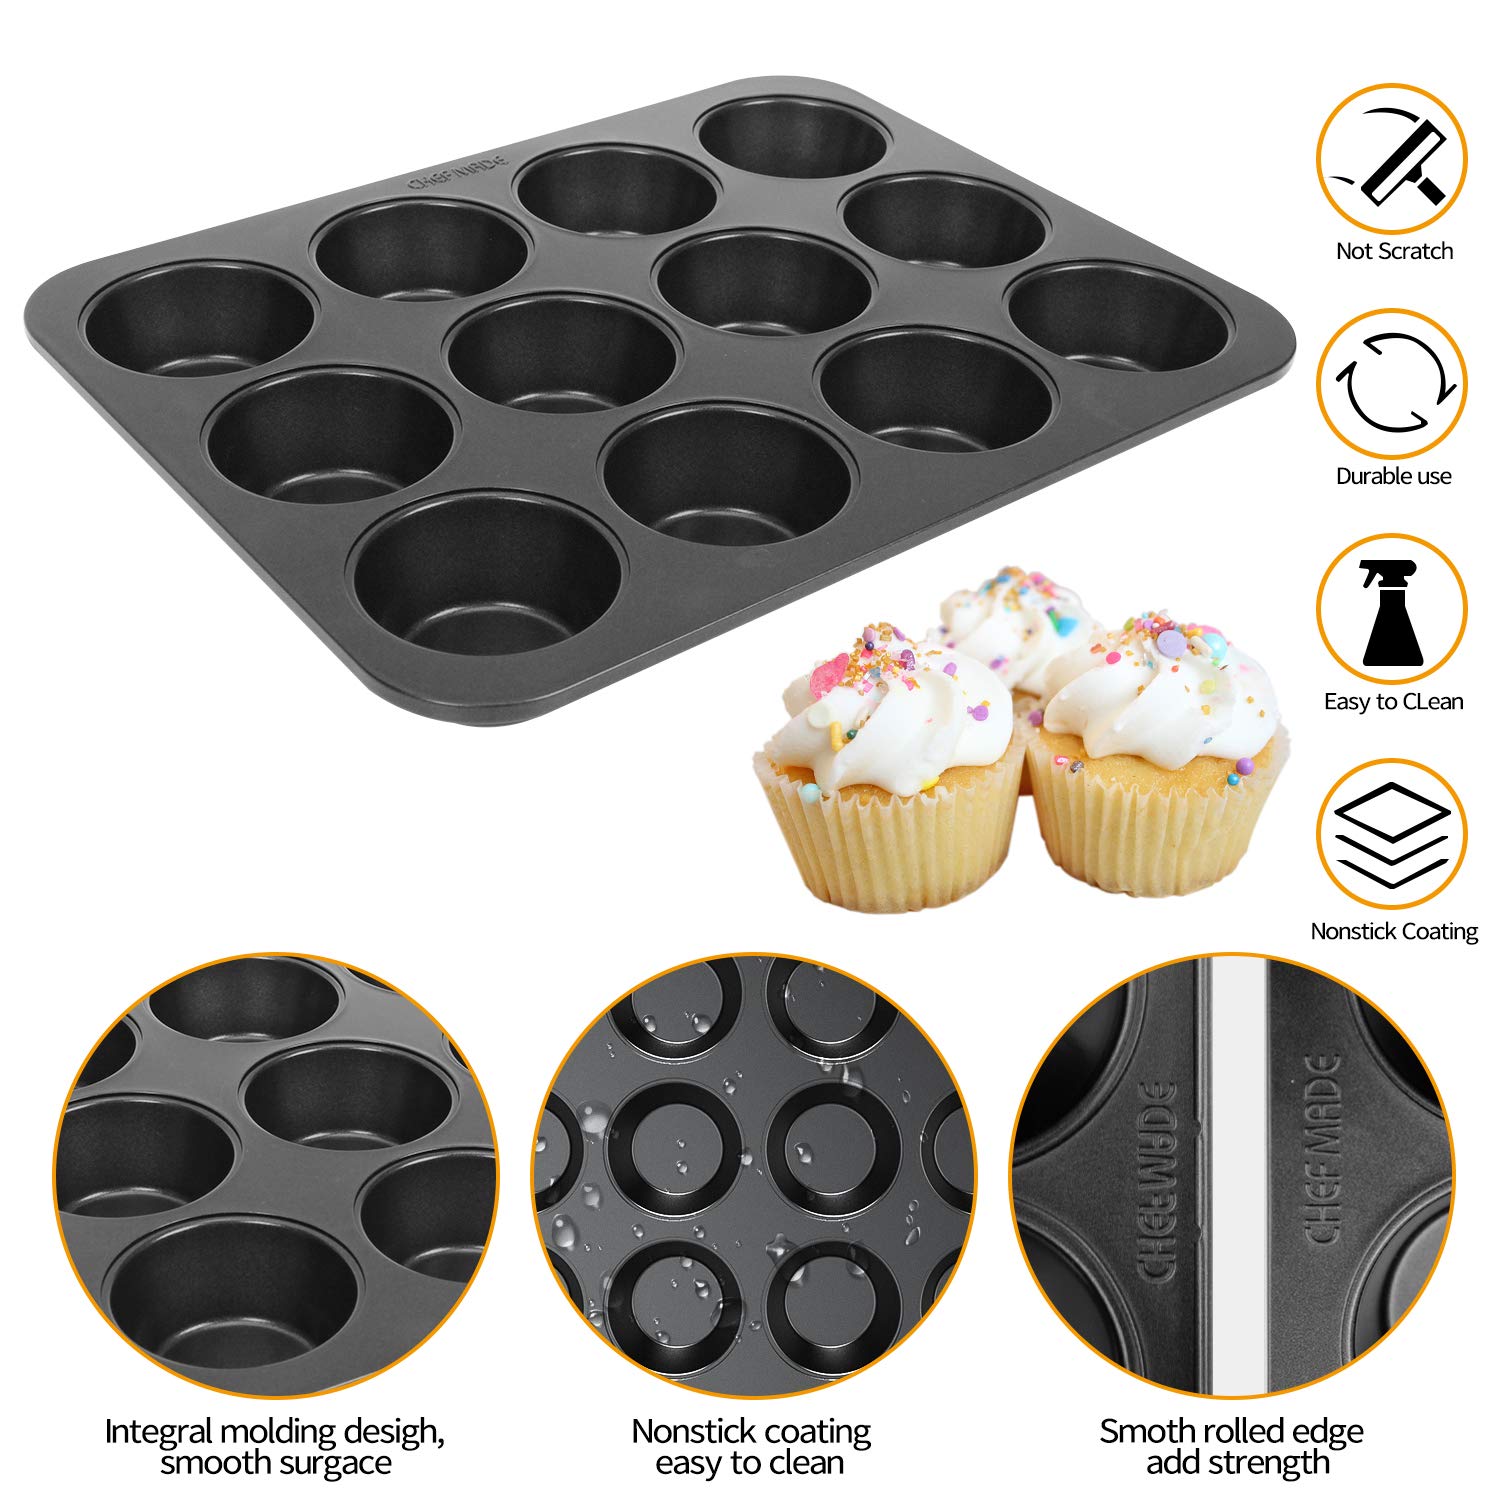 CHEFMADE 12 Cups Muffin Pan Set, 2 Packs Bakeware Non-Stick Cupcake Baking Pan Heavy Duty Carbon Steel Pan Muffin Tins Standard Baking Mold for Cakes